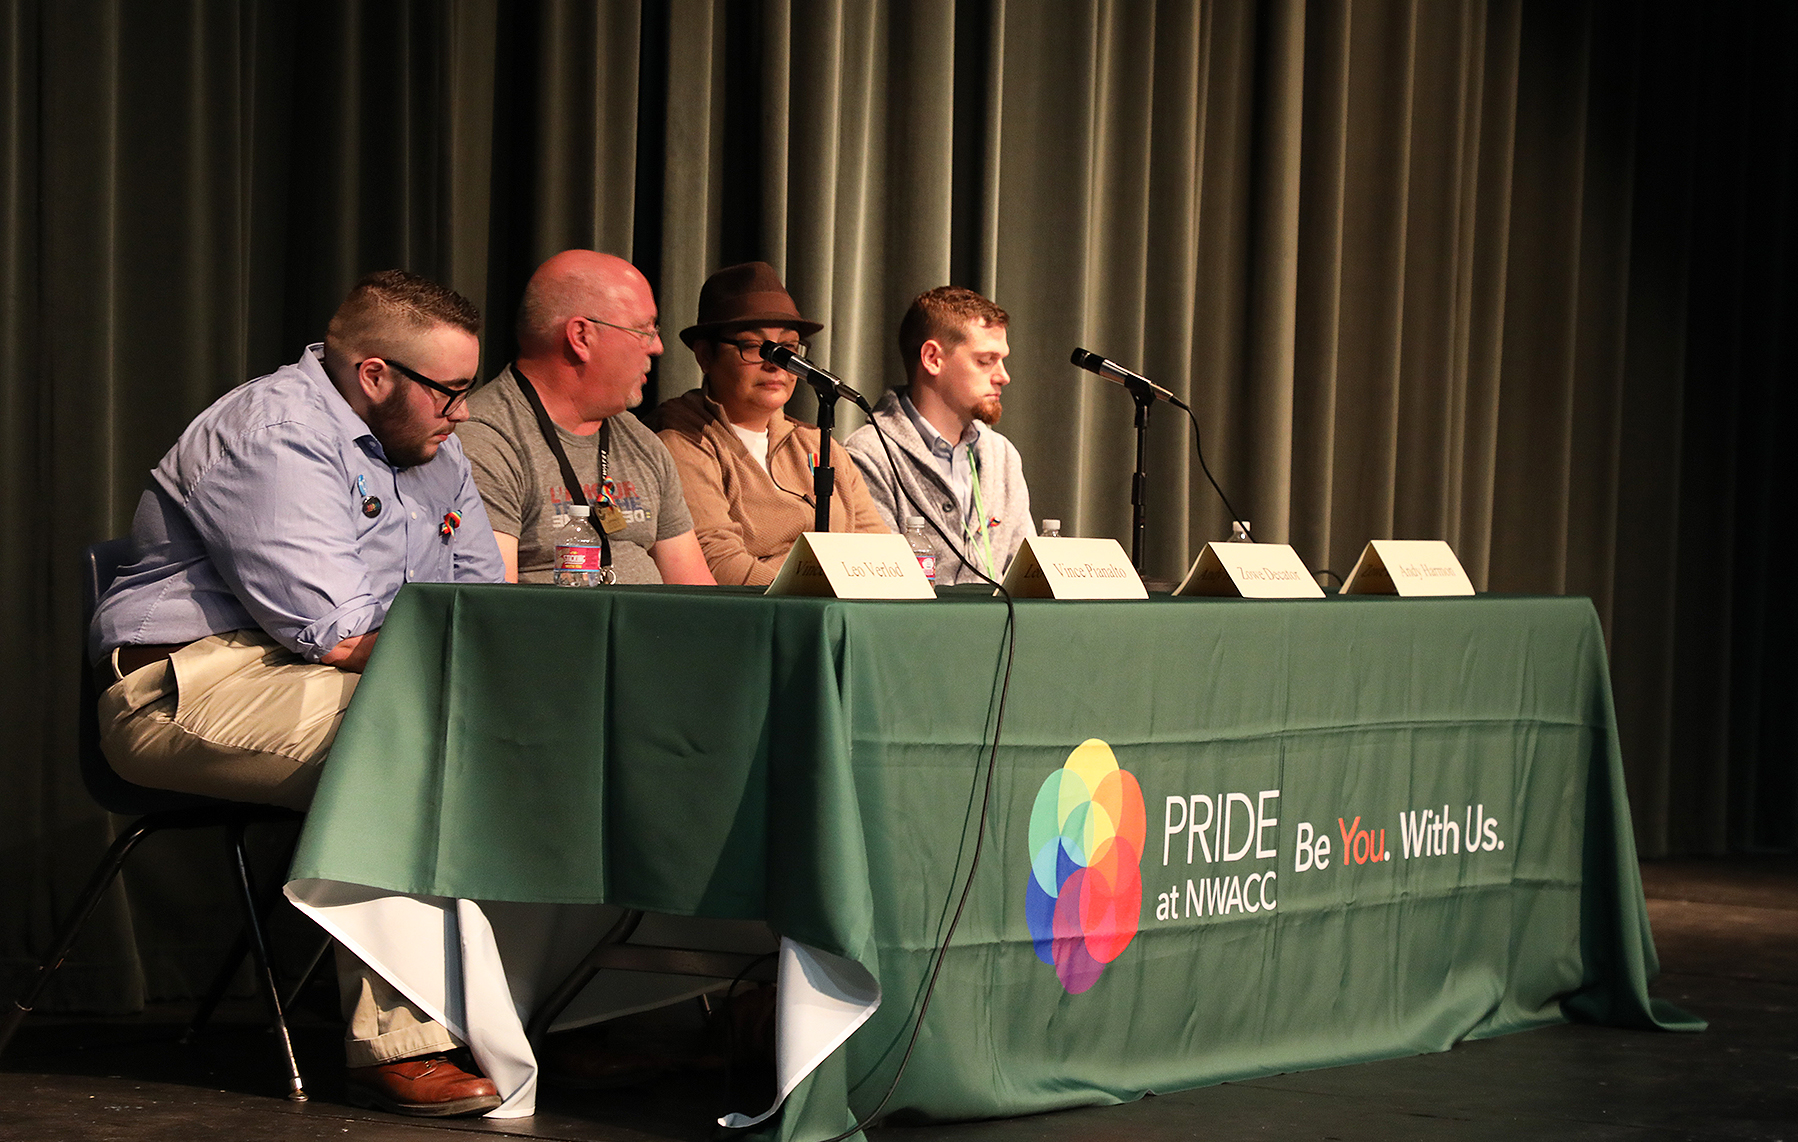 Panel of speakers at an event hosted by NWACC Pride